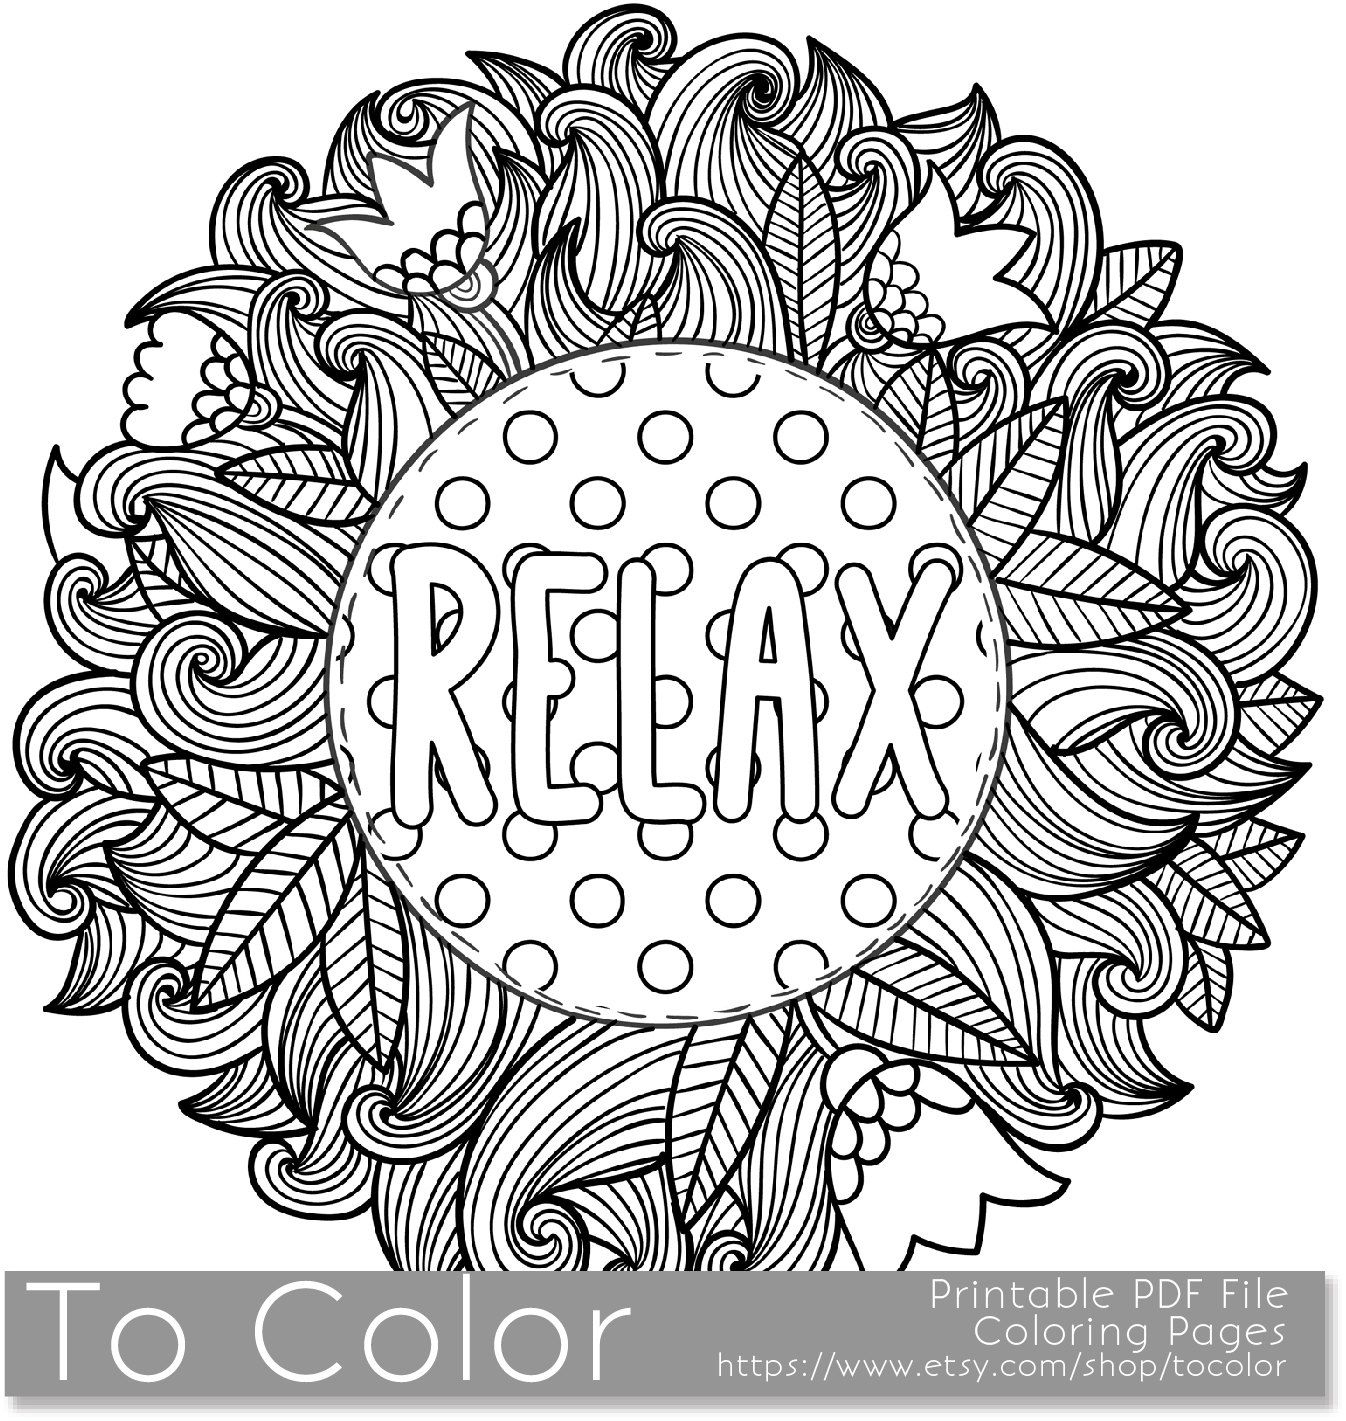 Printable Relax Coloring Page For Adults, Pdf / Jpg, Instant | Colouring Worksheets Printable Pdf